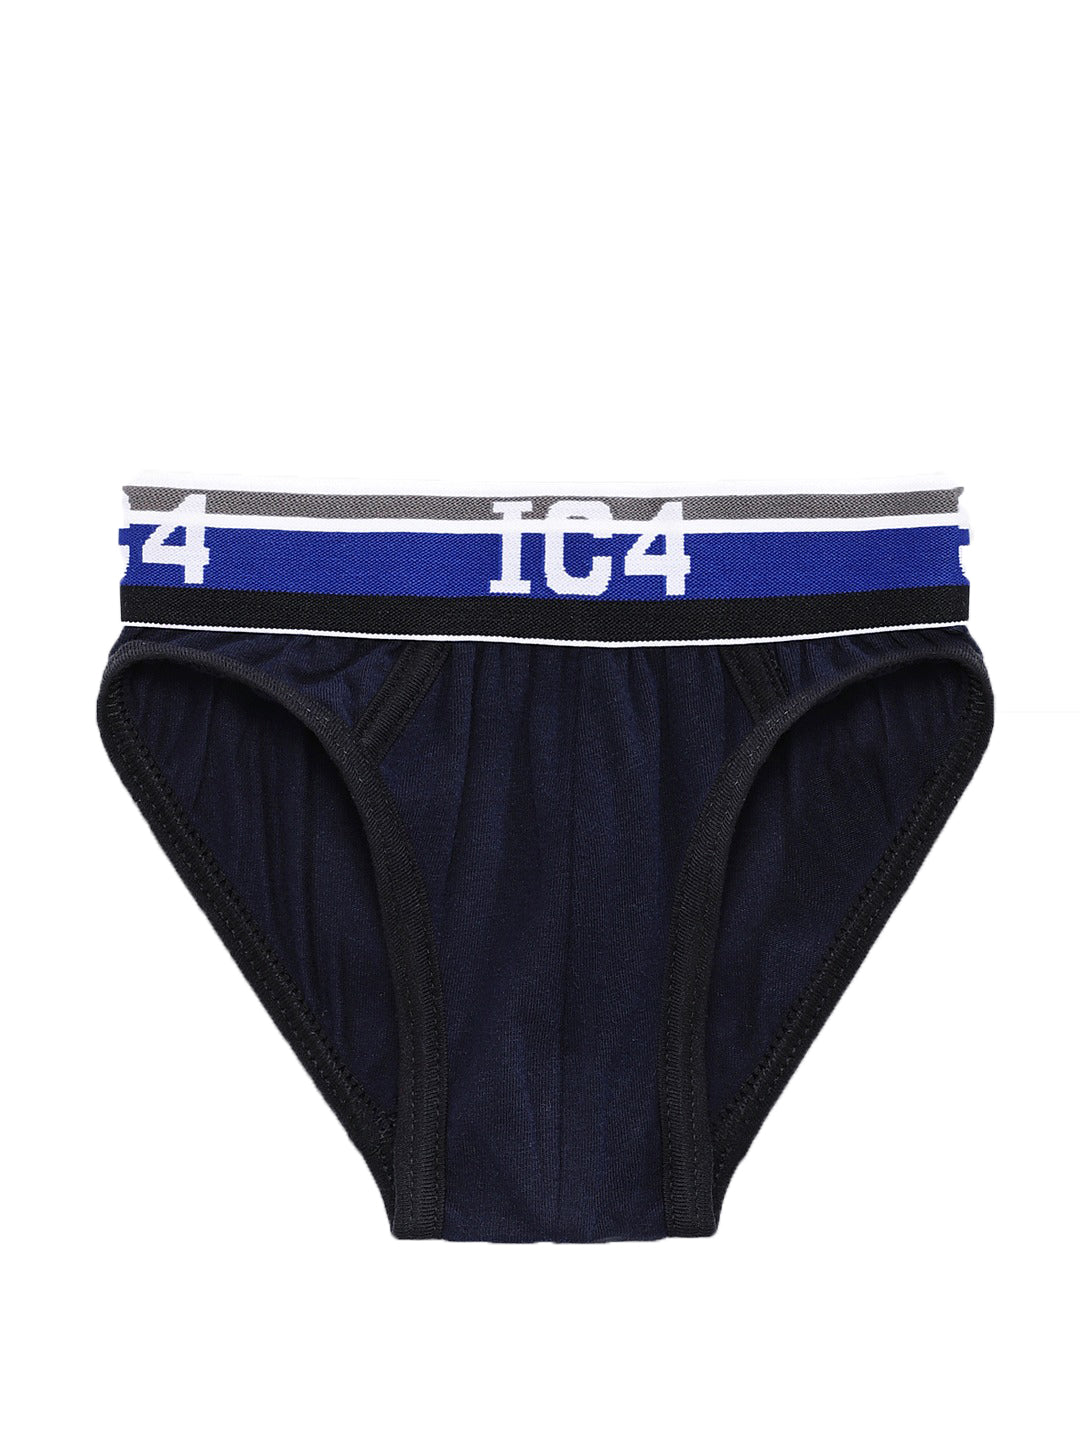 IC4 Boys Brief Navy Combo Pack of 3